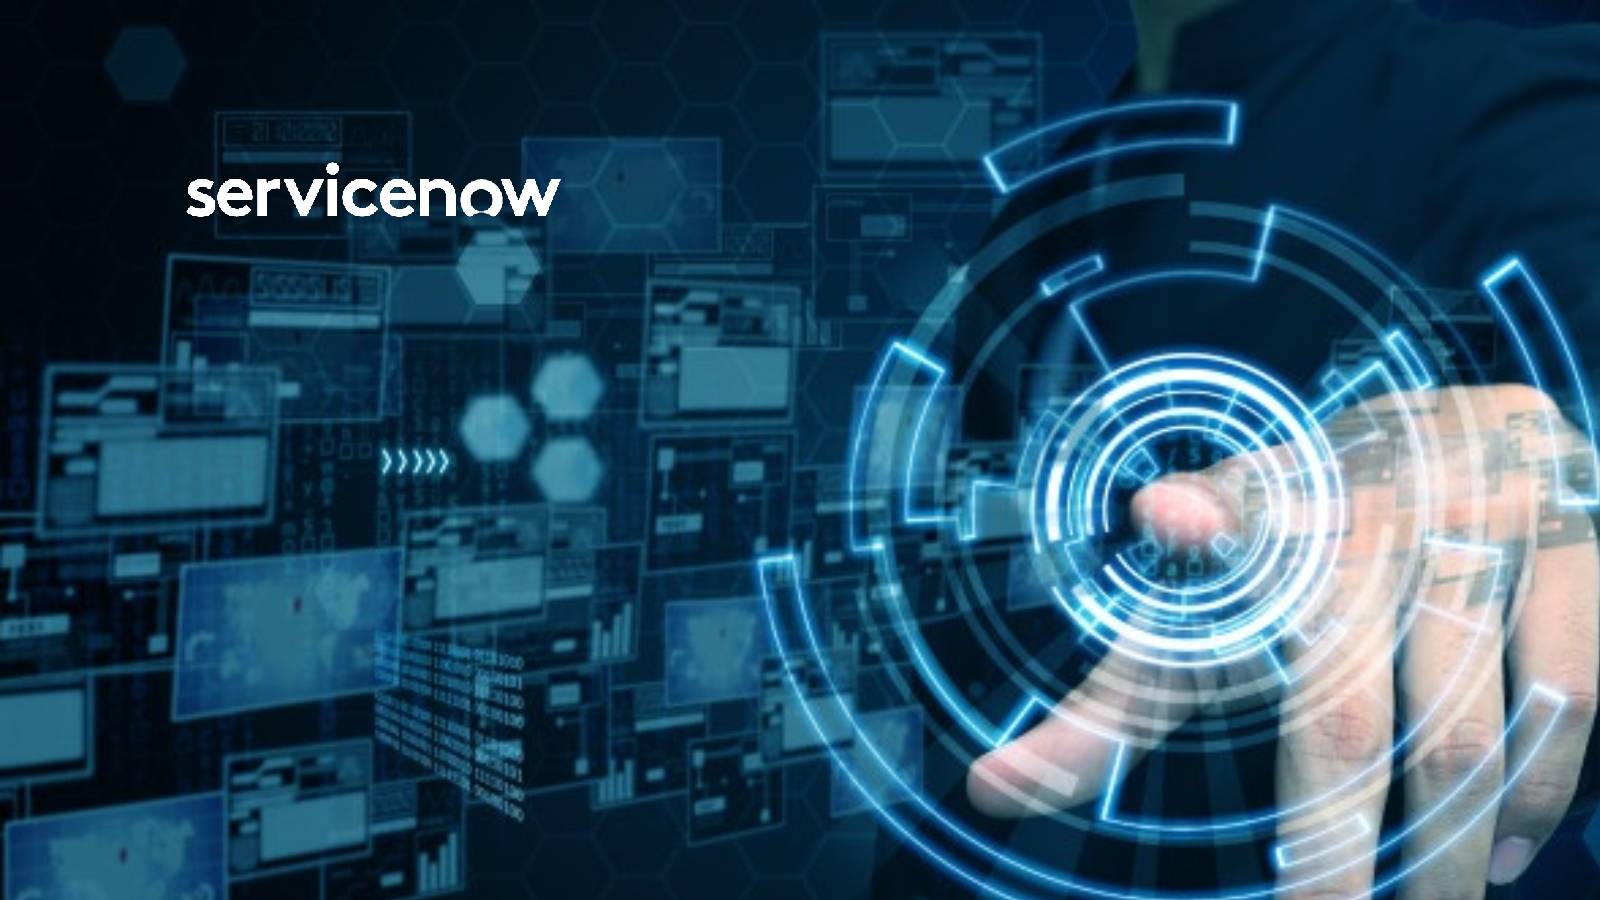 How to Learn ServiceNow Skills to Grow Your IT Career?